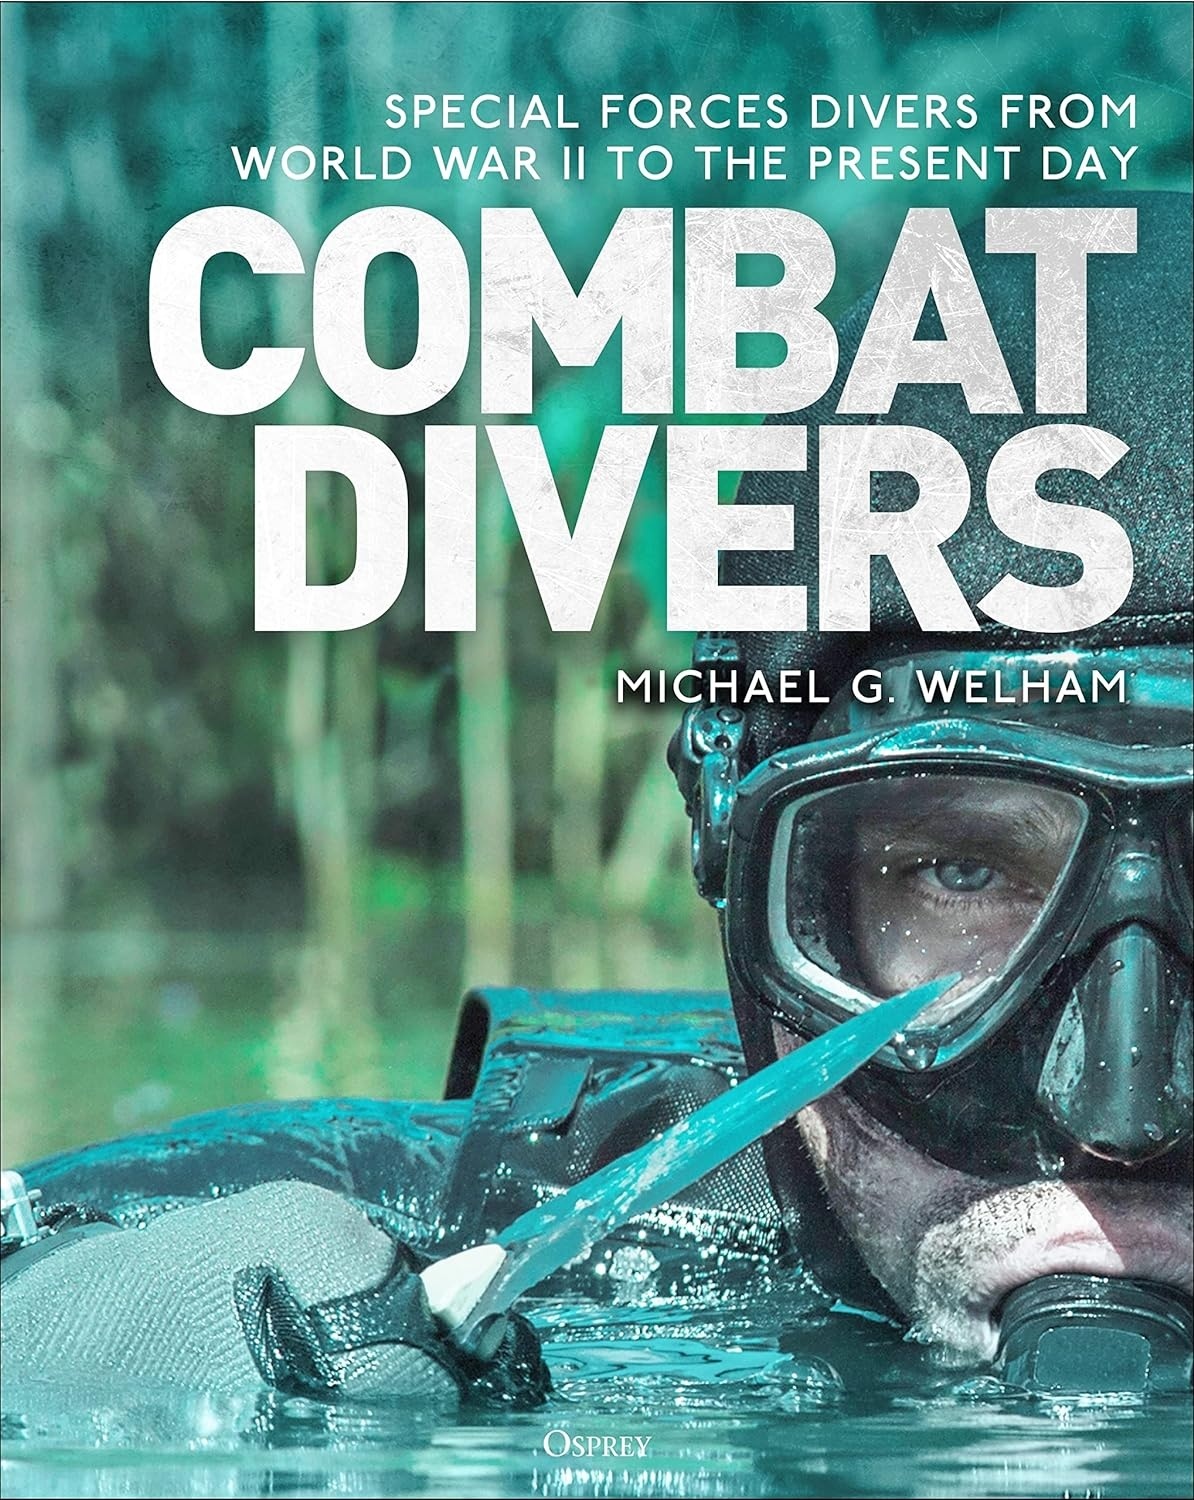 Combat Divers "An illustrated history of special forces divers"